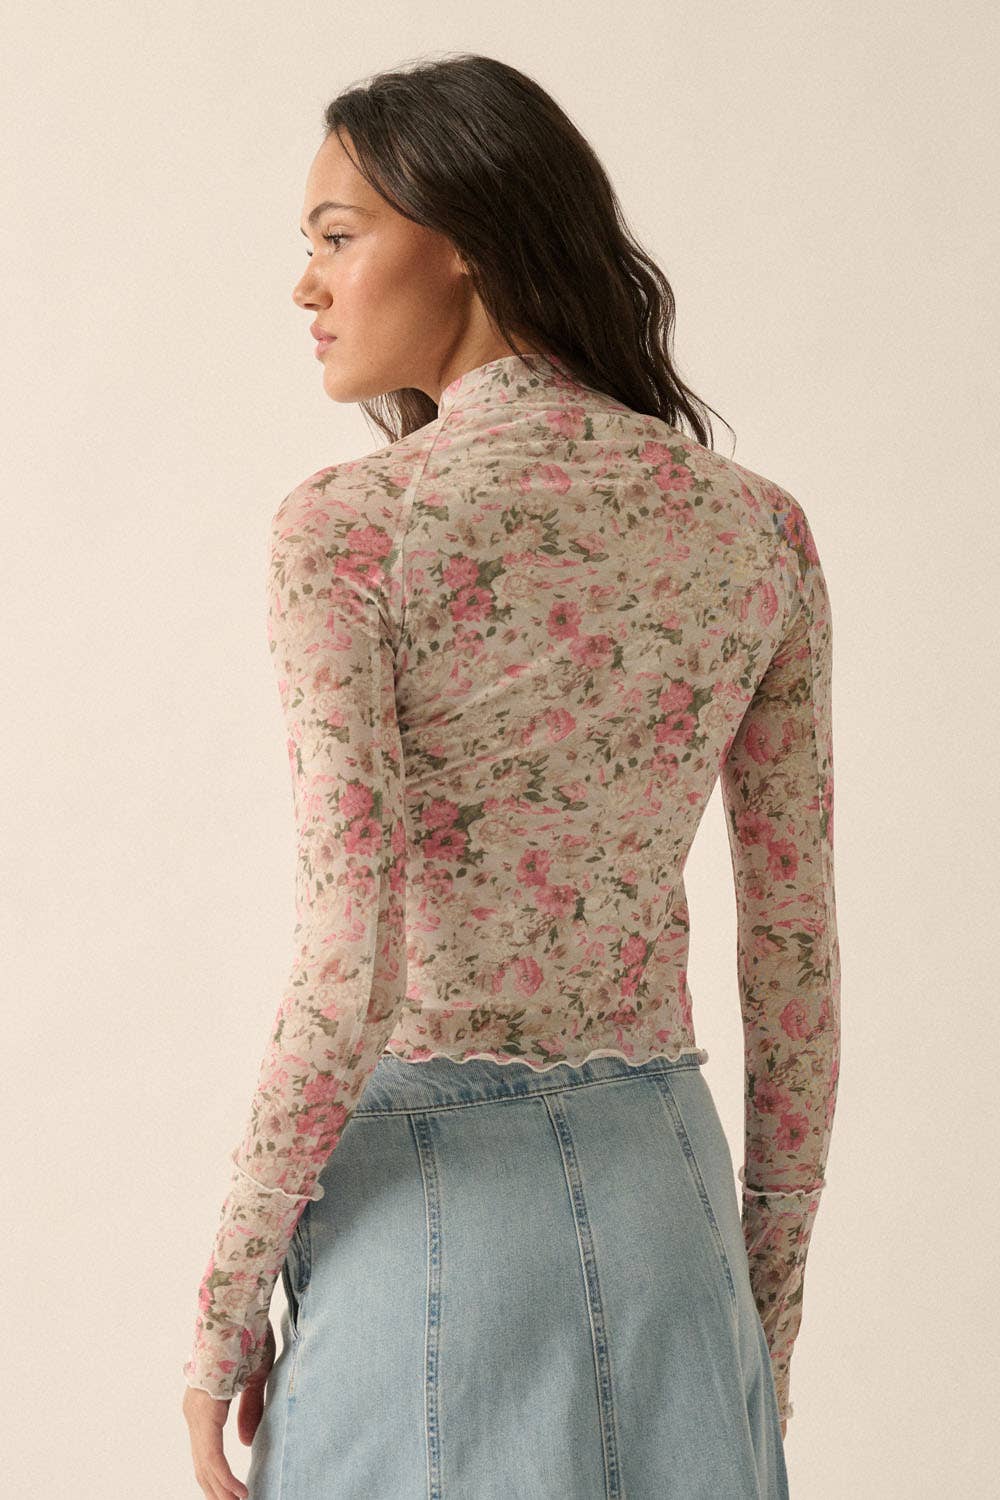 Addison Pink Floral Top